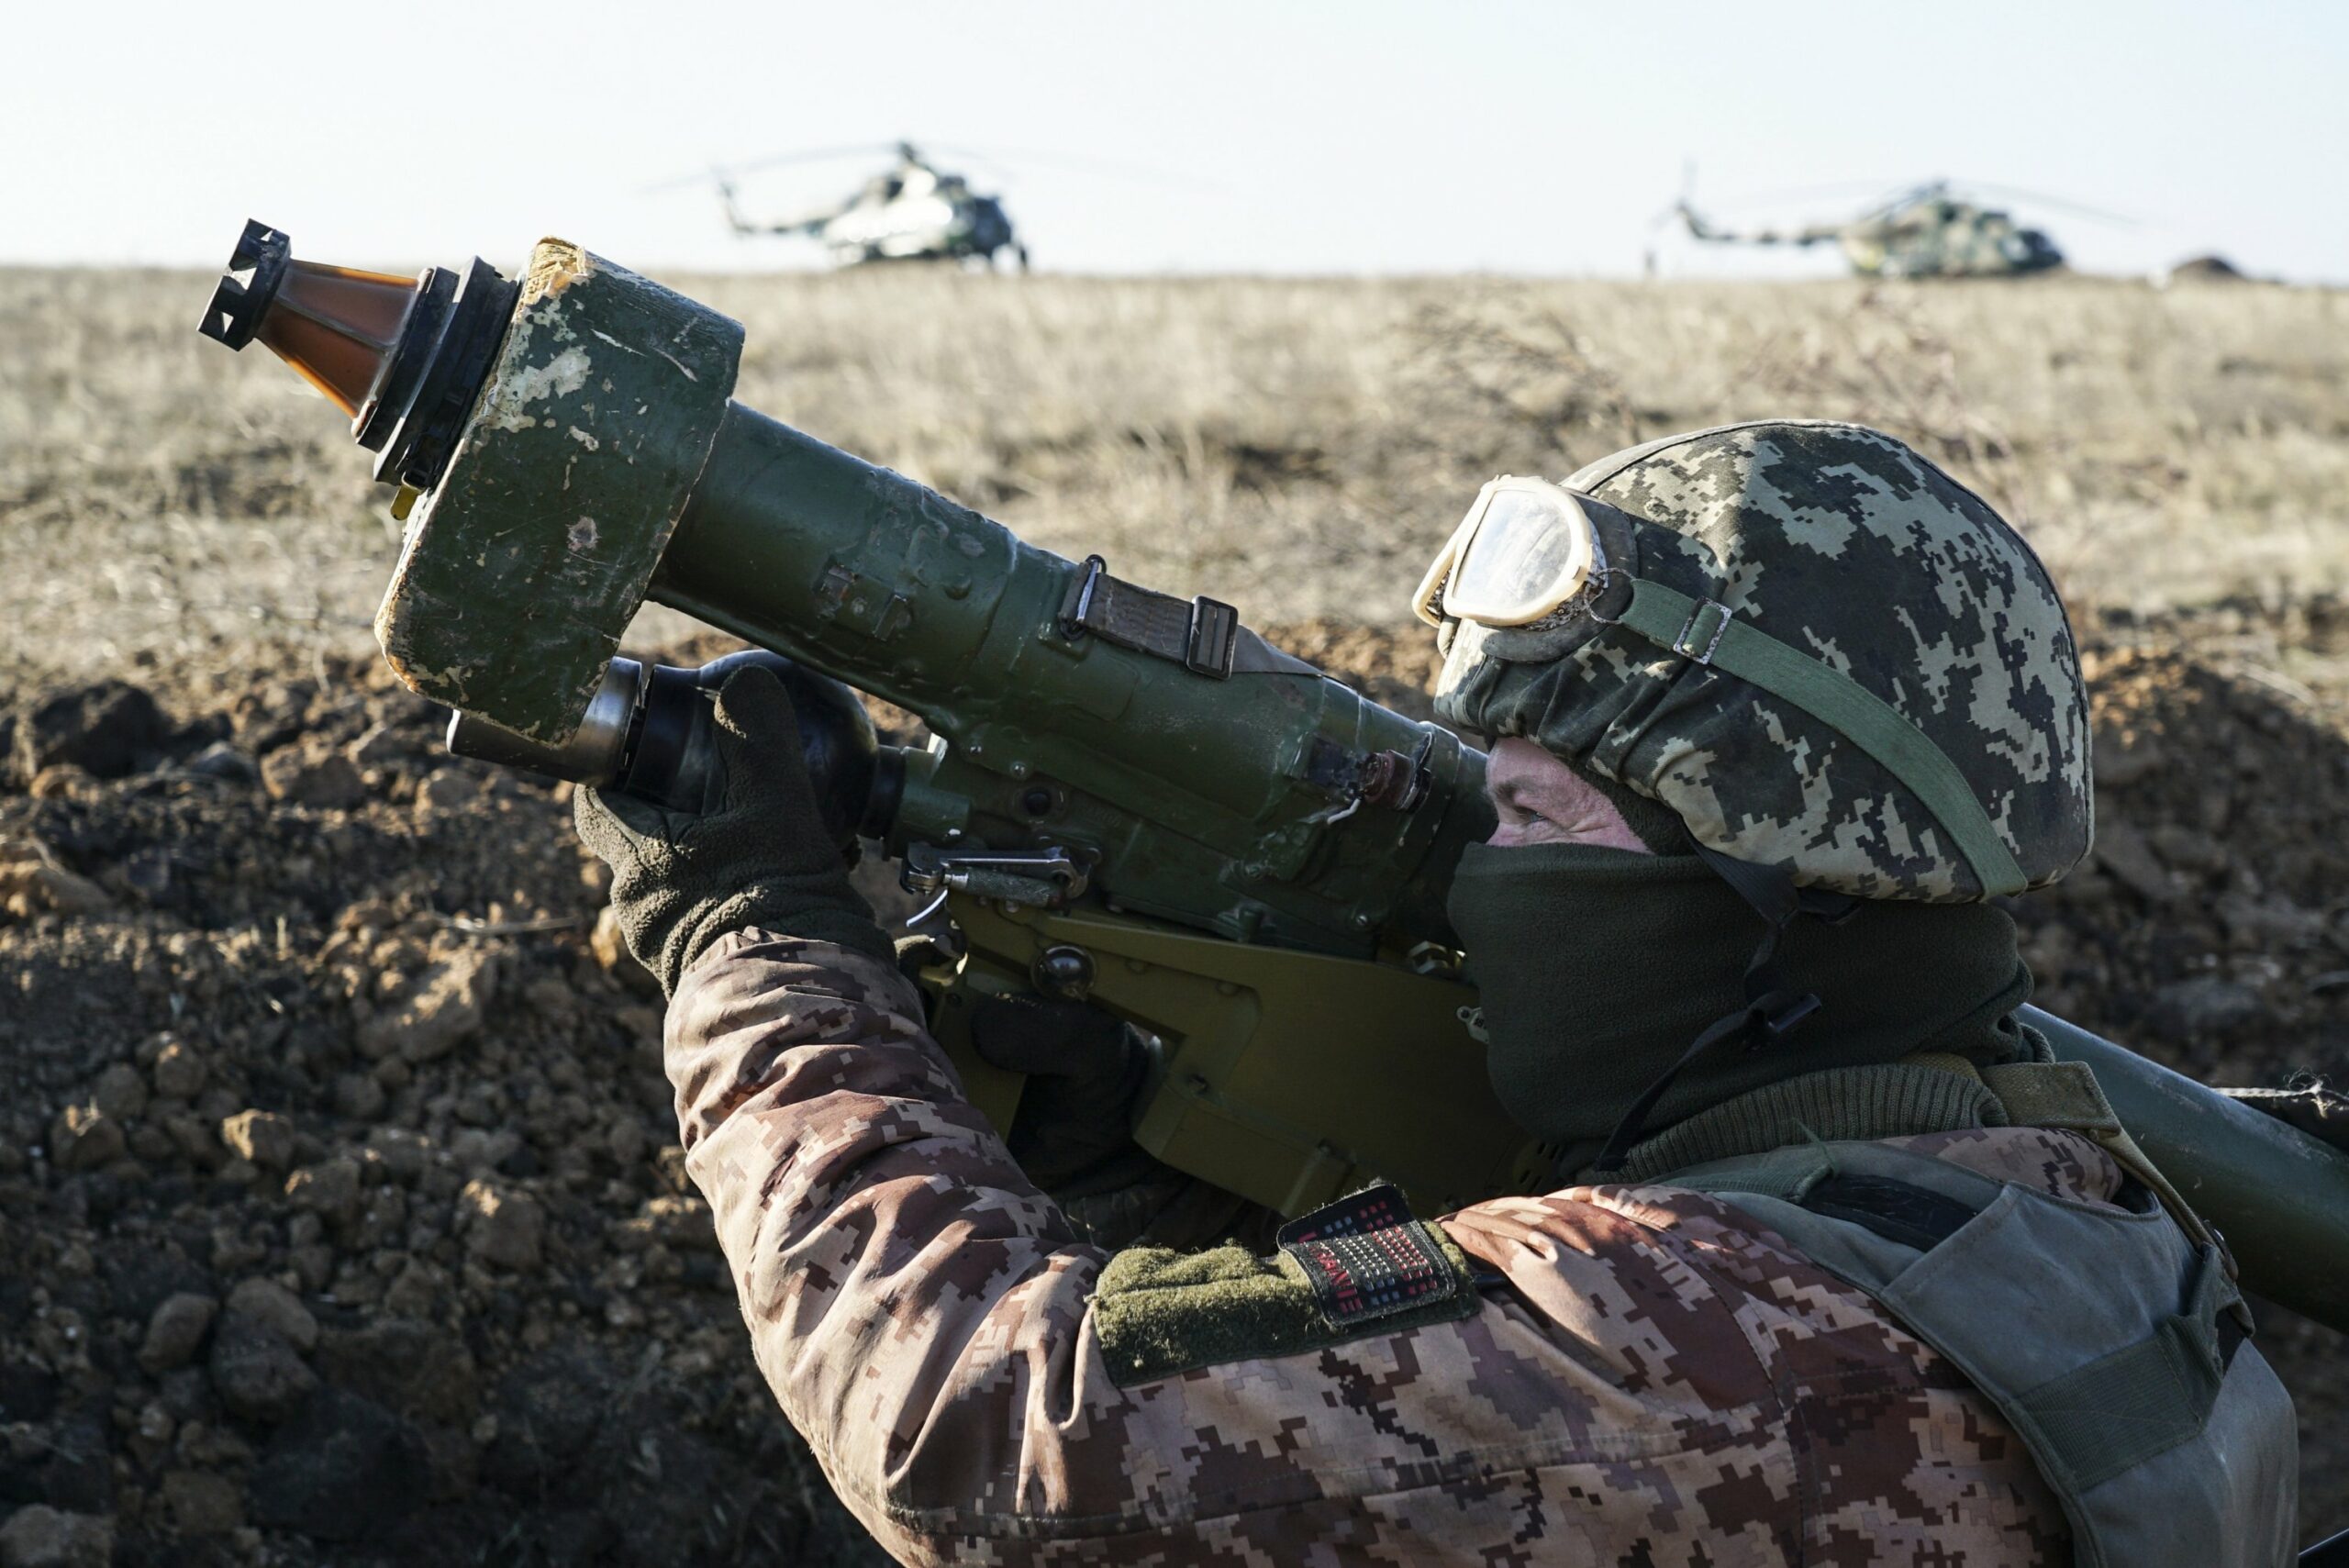 A Ukrainian soldier aims with an anti-aircraft launcher